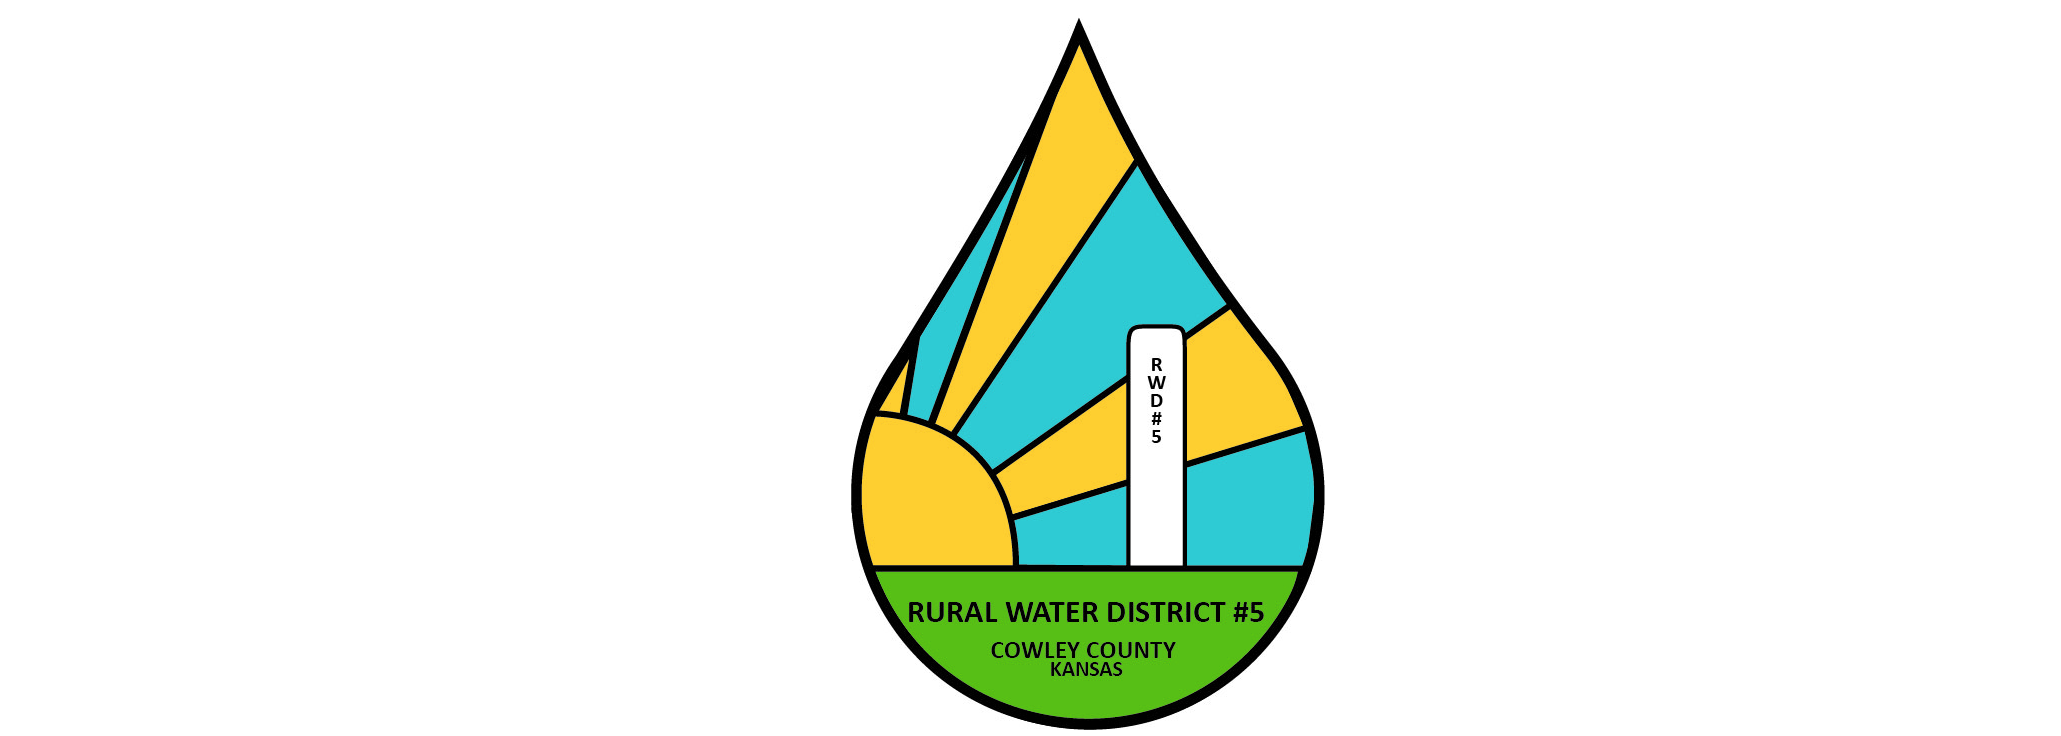 Rural Water District 5, Cowley County